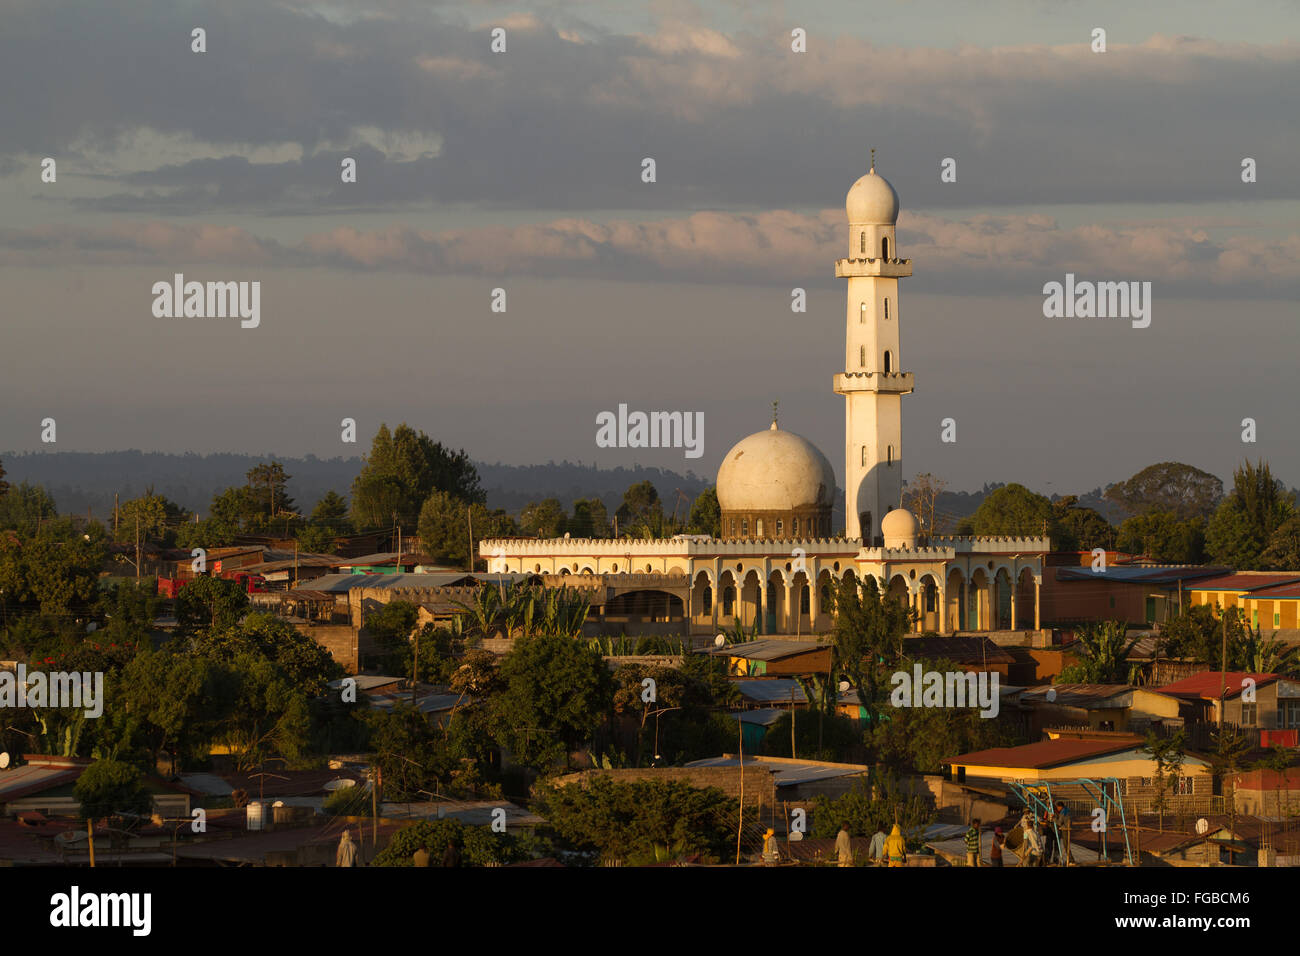 A mosque in the golden early morning sun, Hossana, Ethiopia Africa Stock Photo